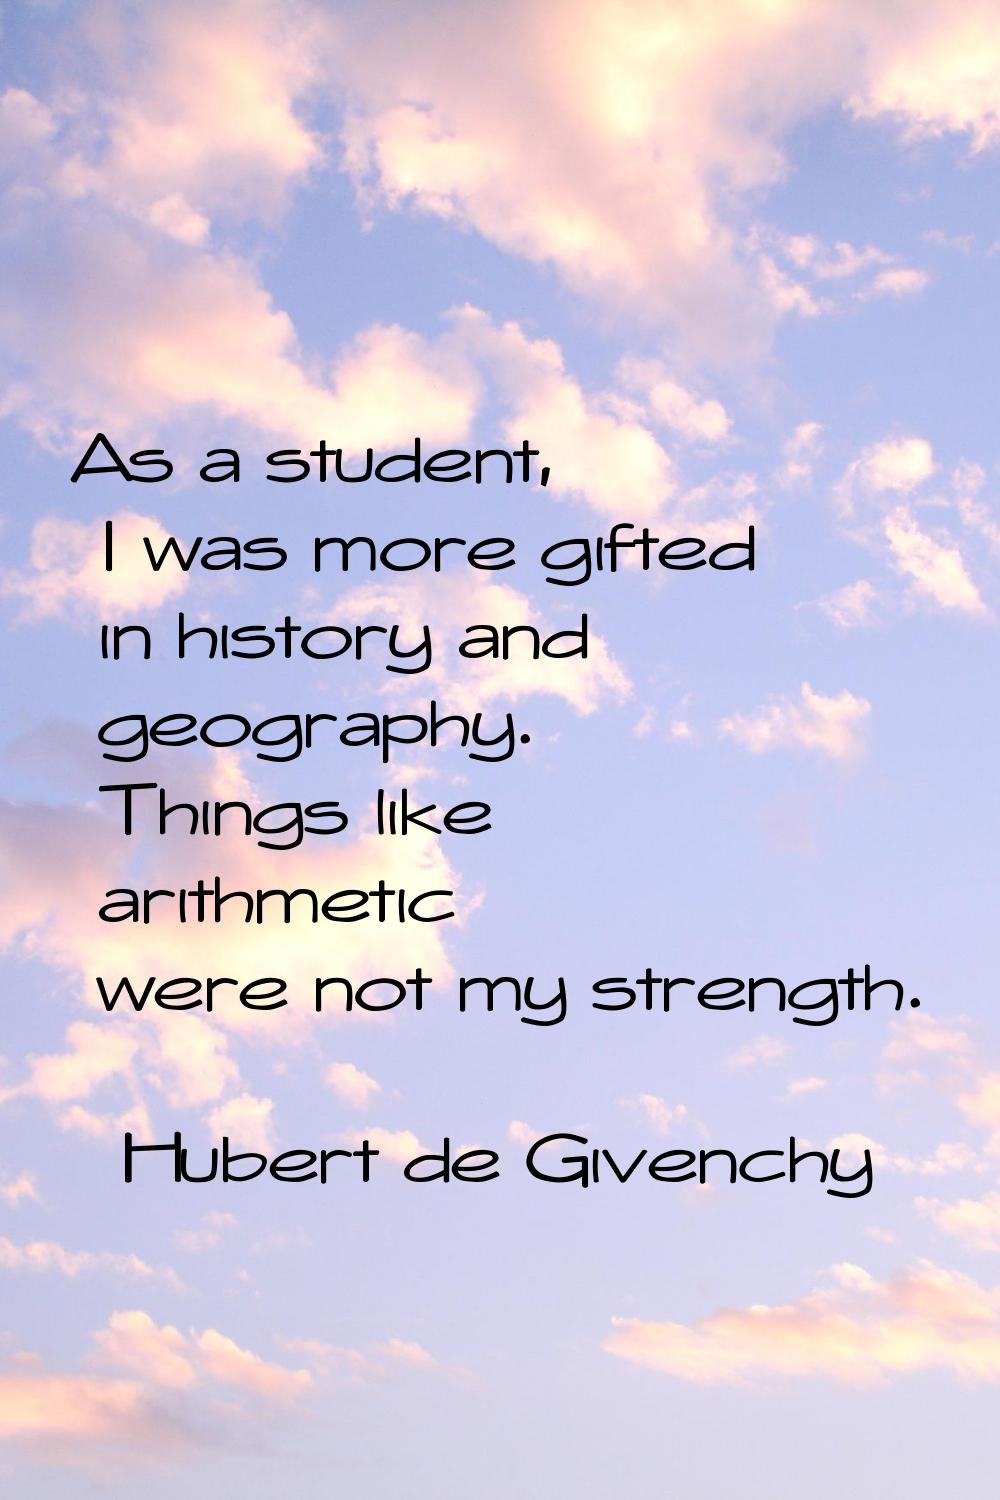 As a student, I was more gifted in history and geography. Things like arithmetic were not my streng